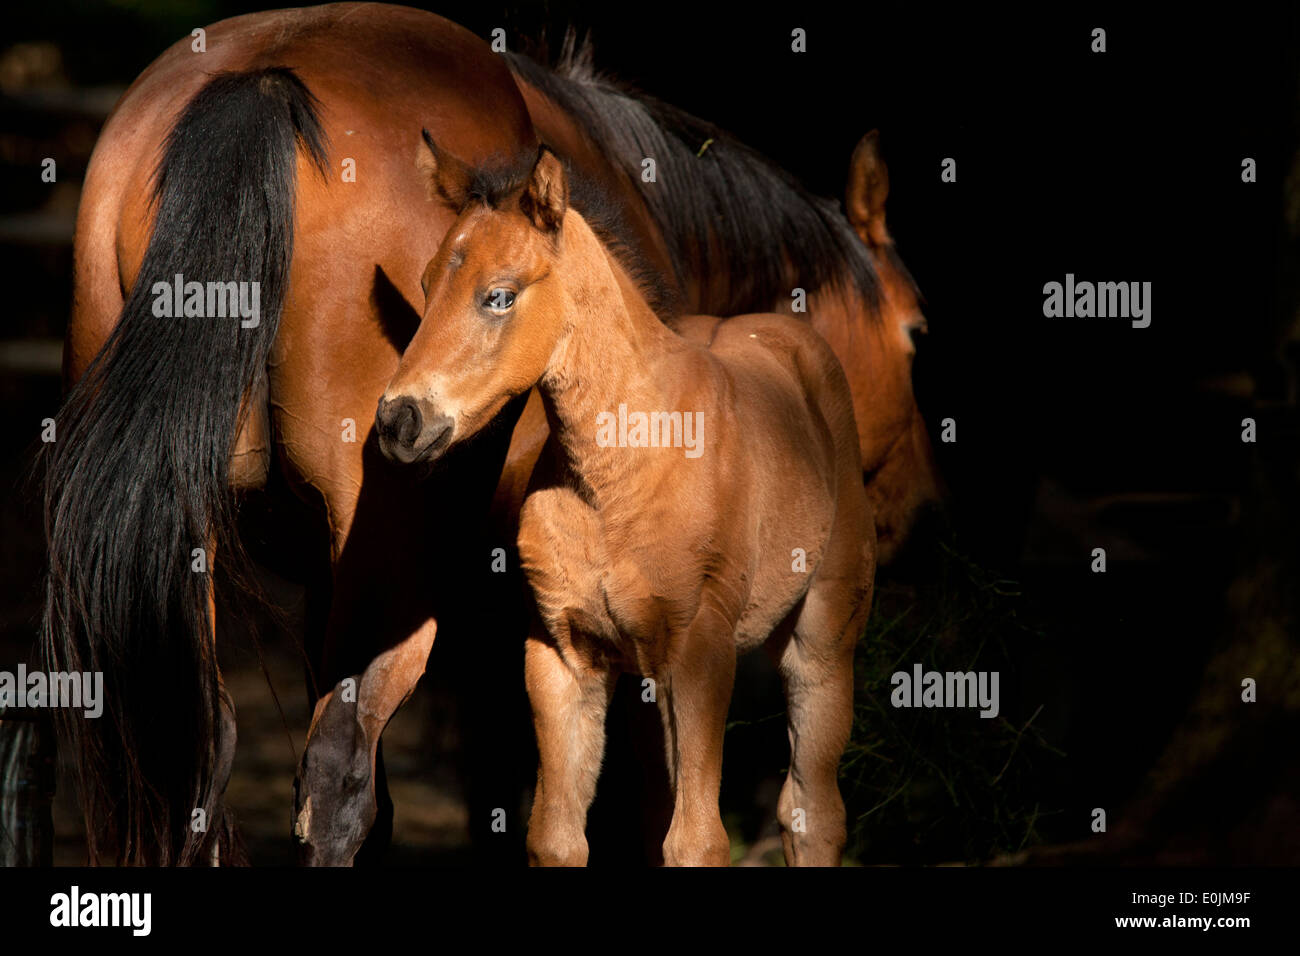 Colt next to mother. Stock Photo